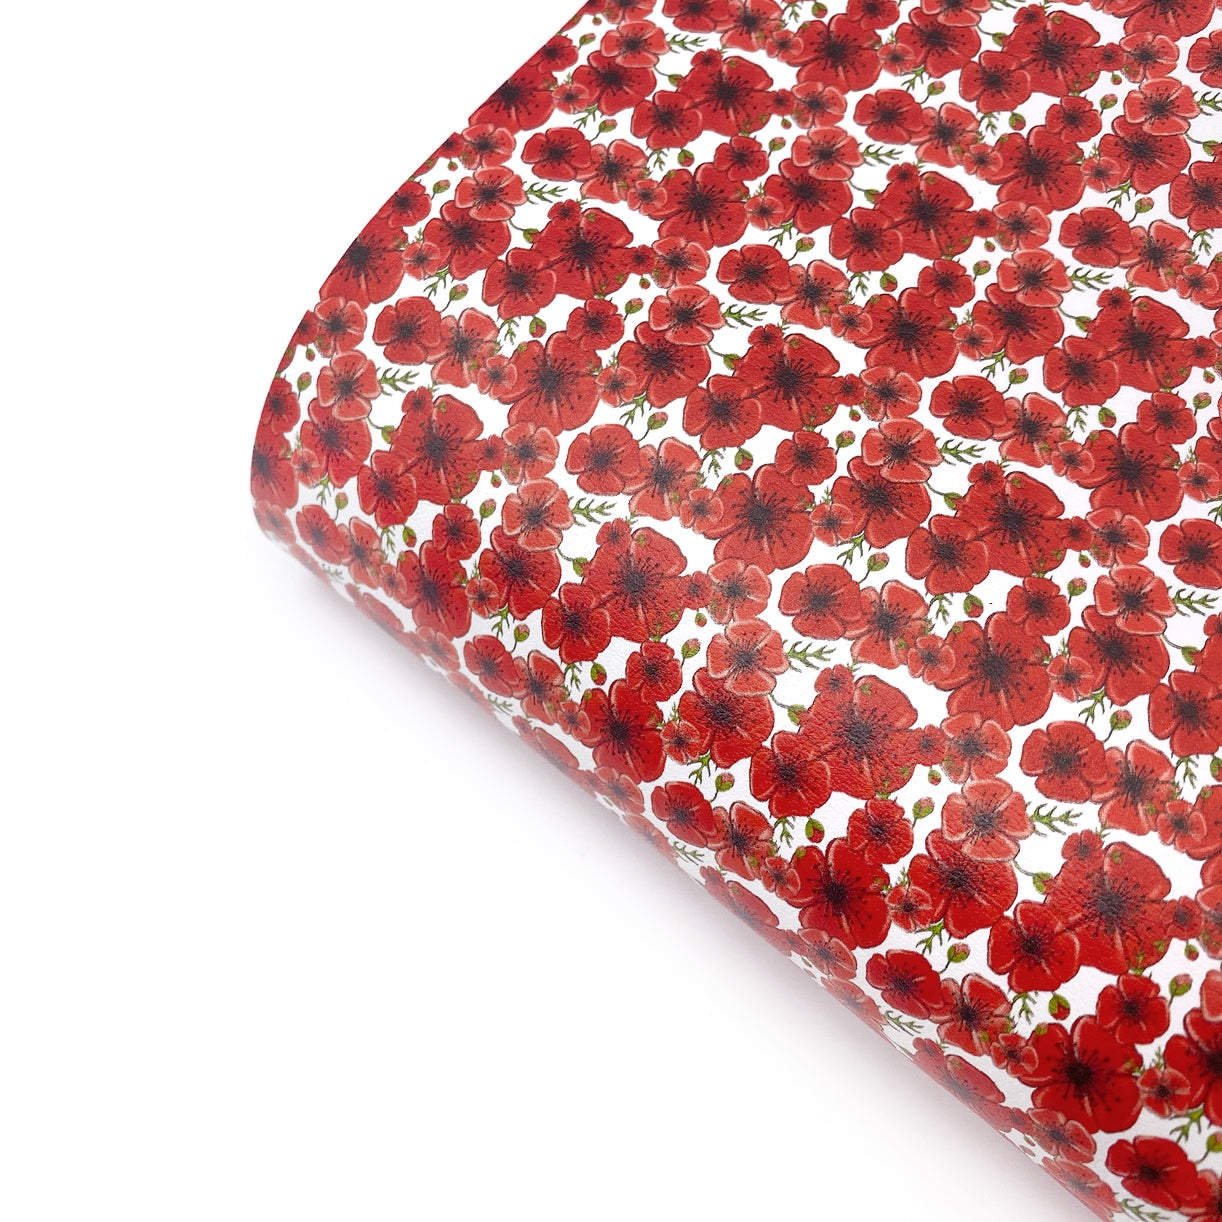 Poppy Fields Premium Faux Leather Fabric Sheets